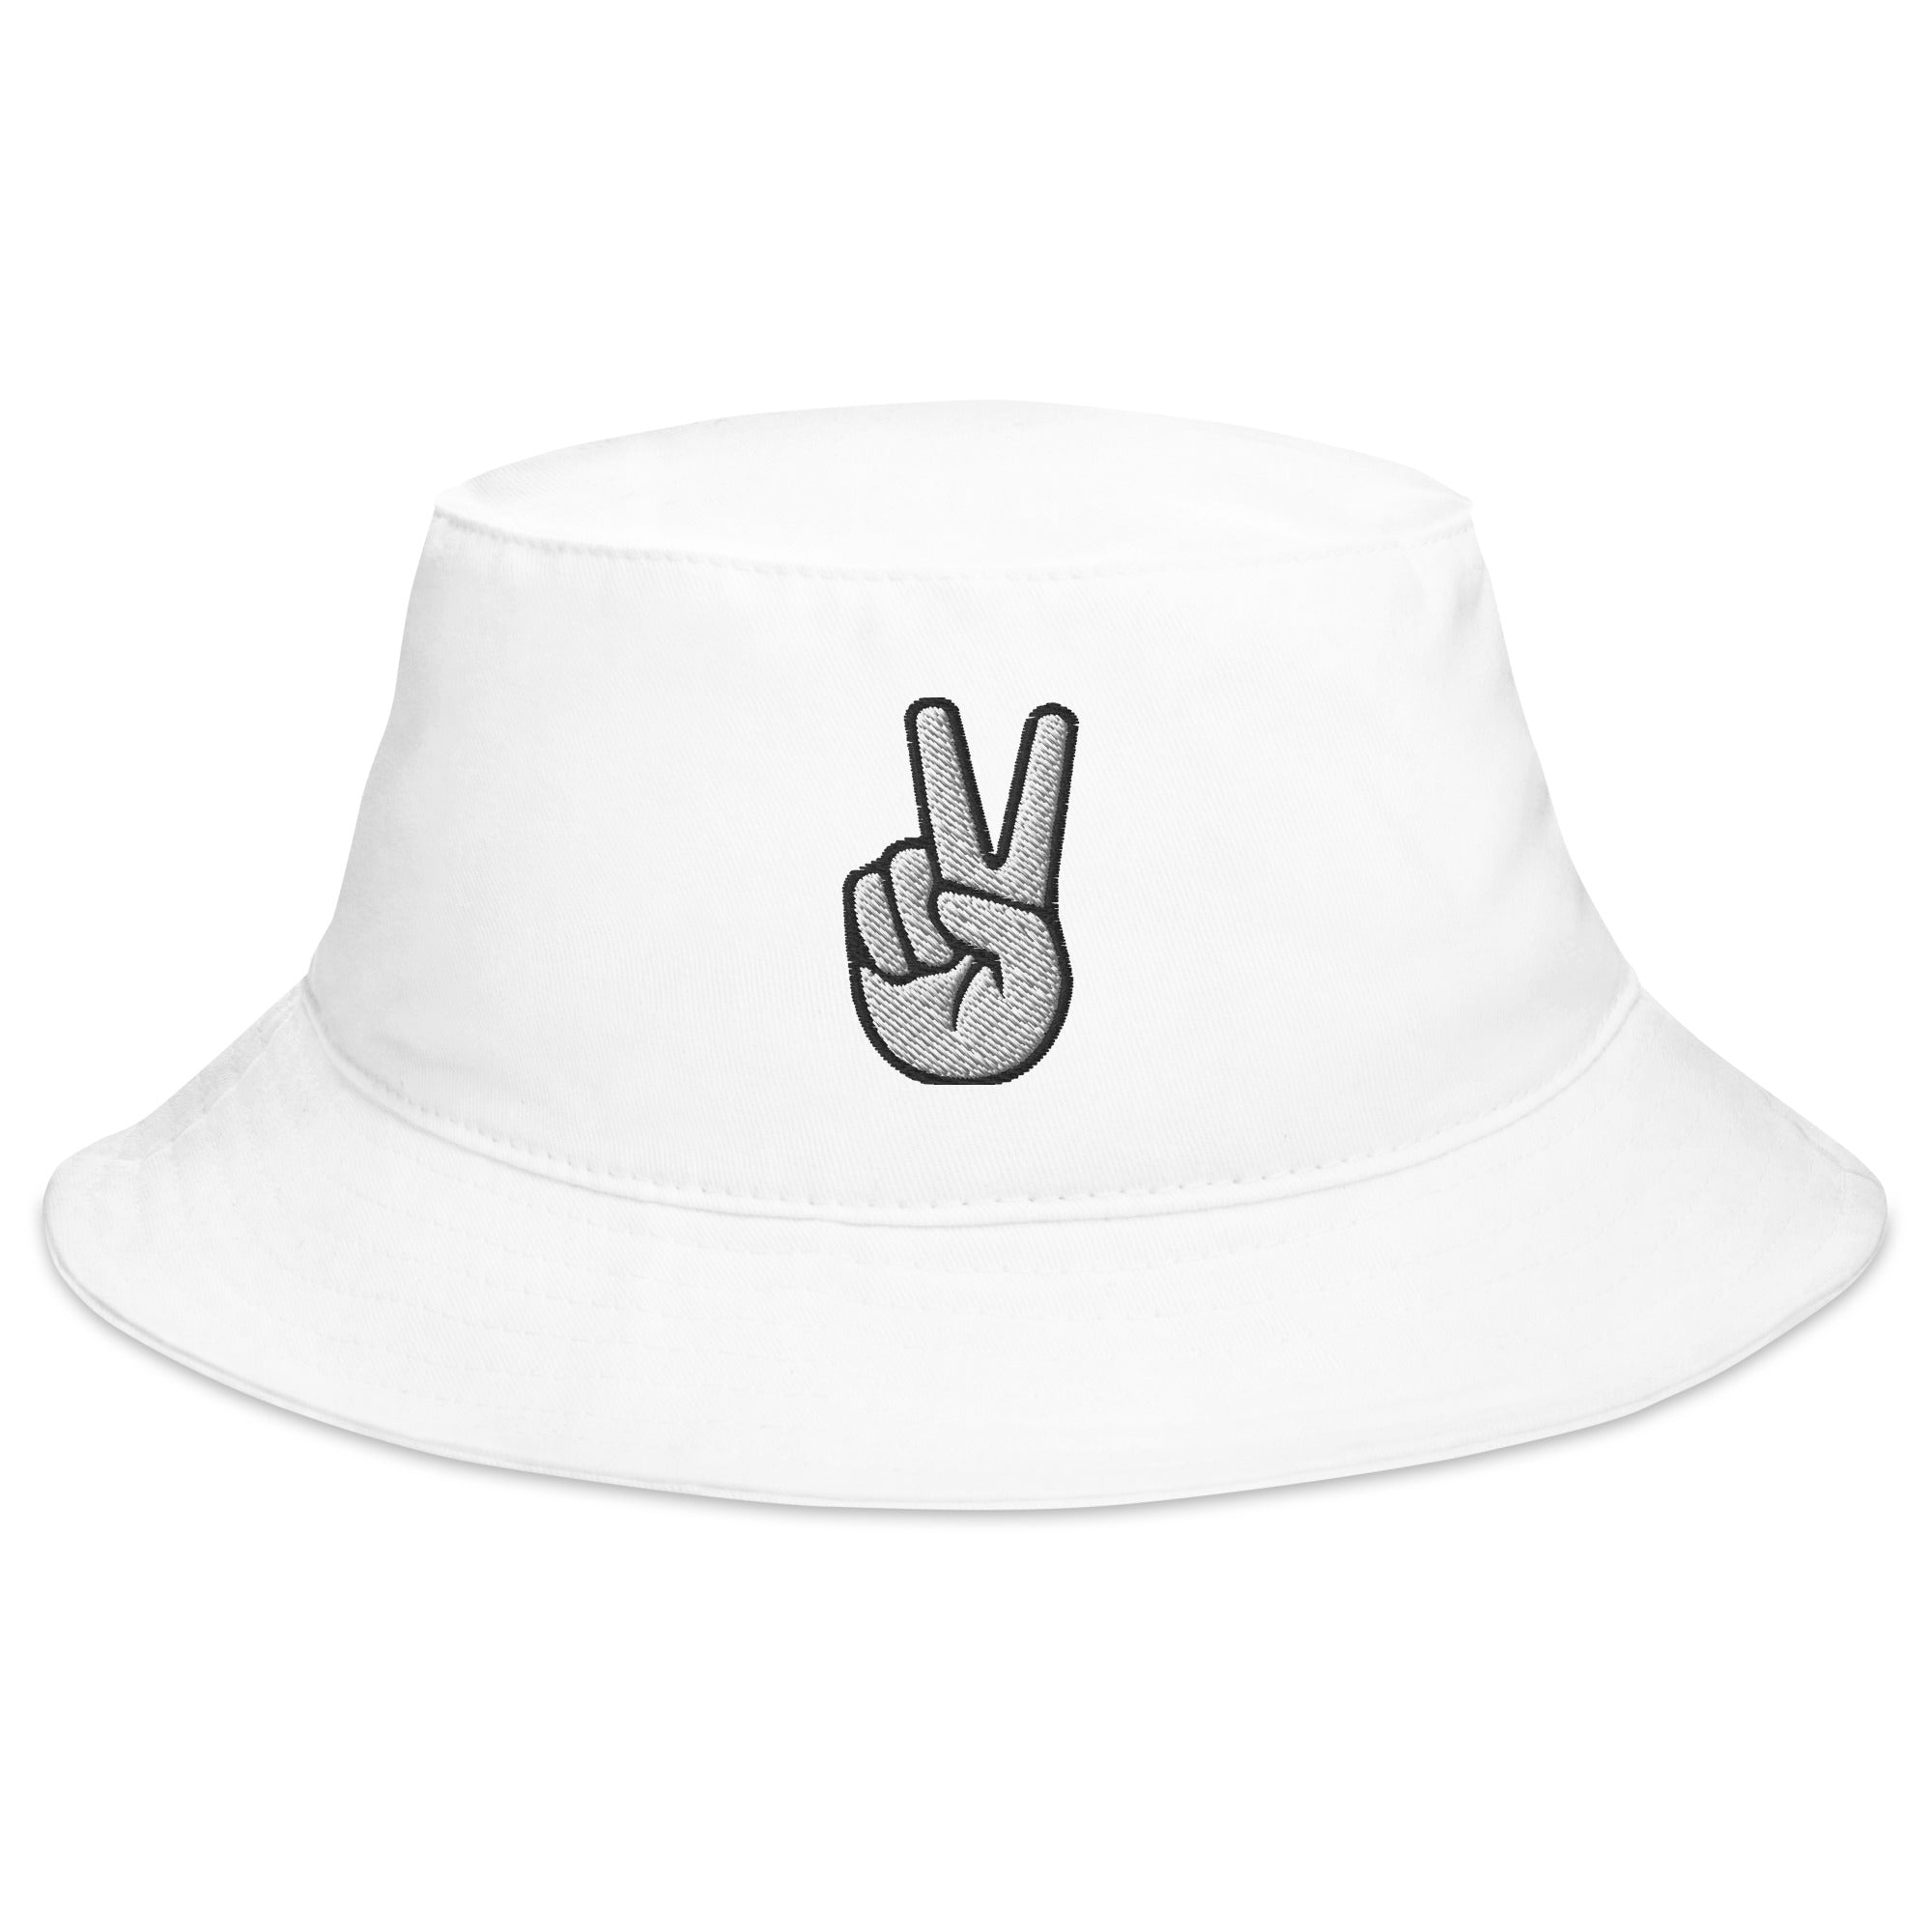 The V Sign for Victory Hand Gesture Embroidered Bucket Hat